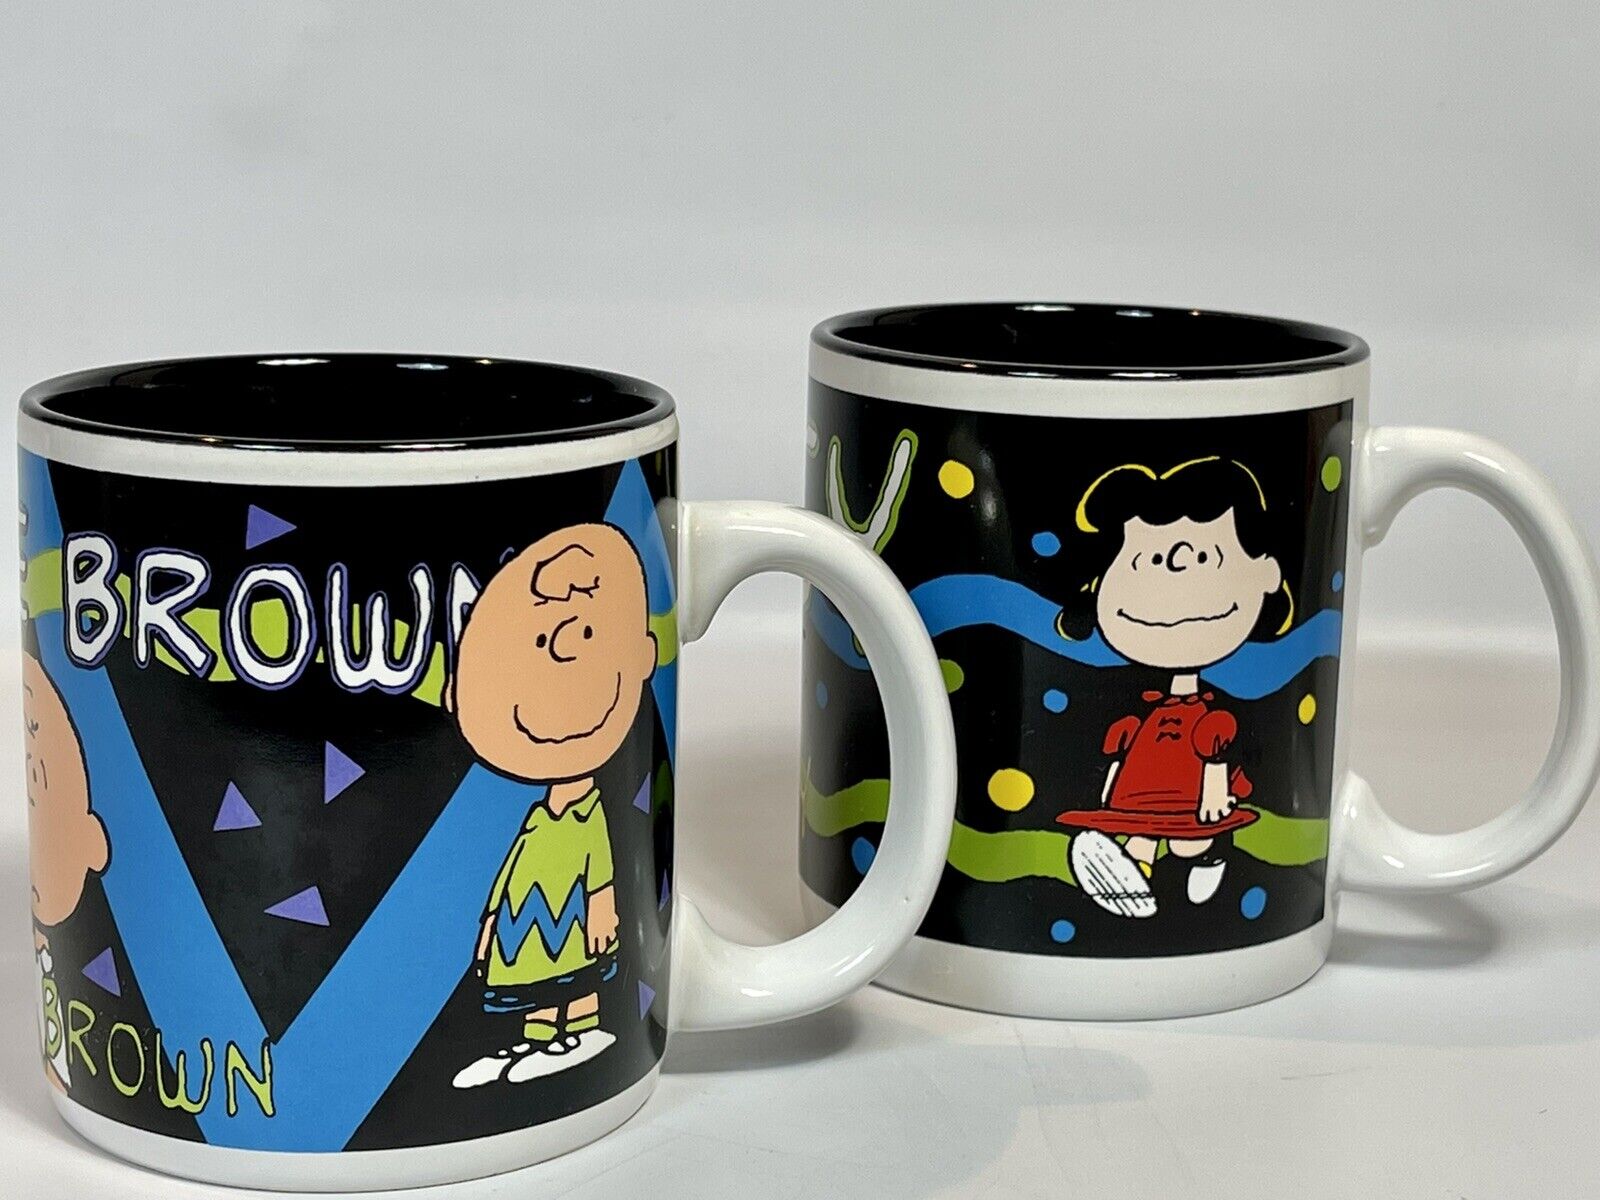 Vintage 1994 Peanuts Charlie Brown & Lucy Ceramic Mugs by Accents Set of 2